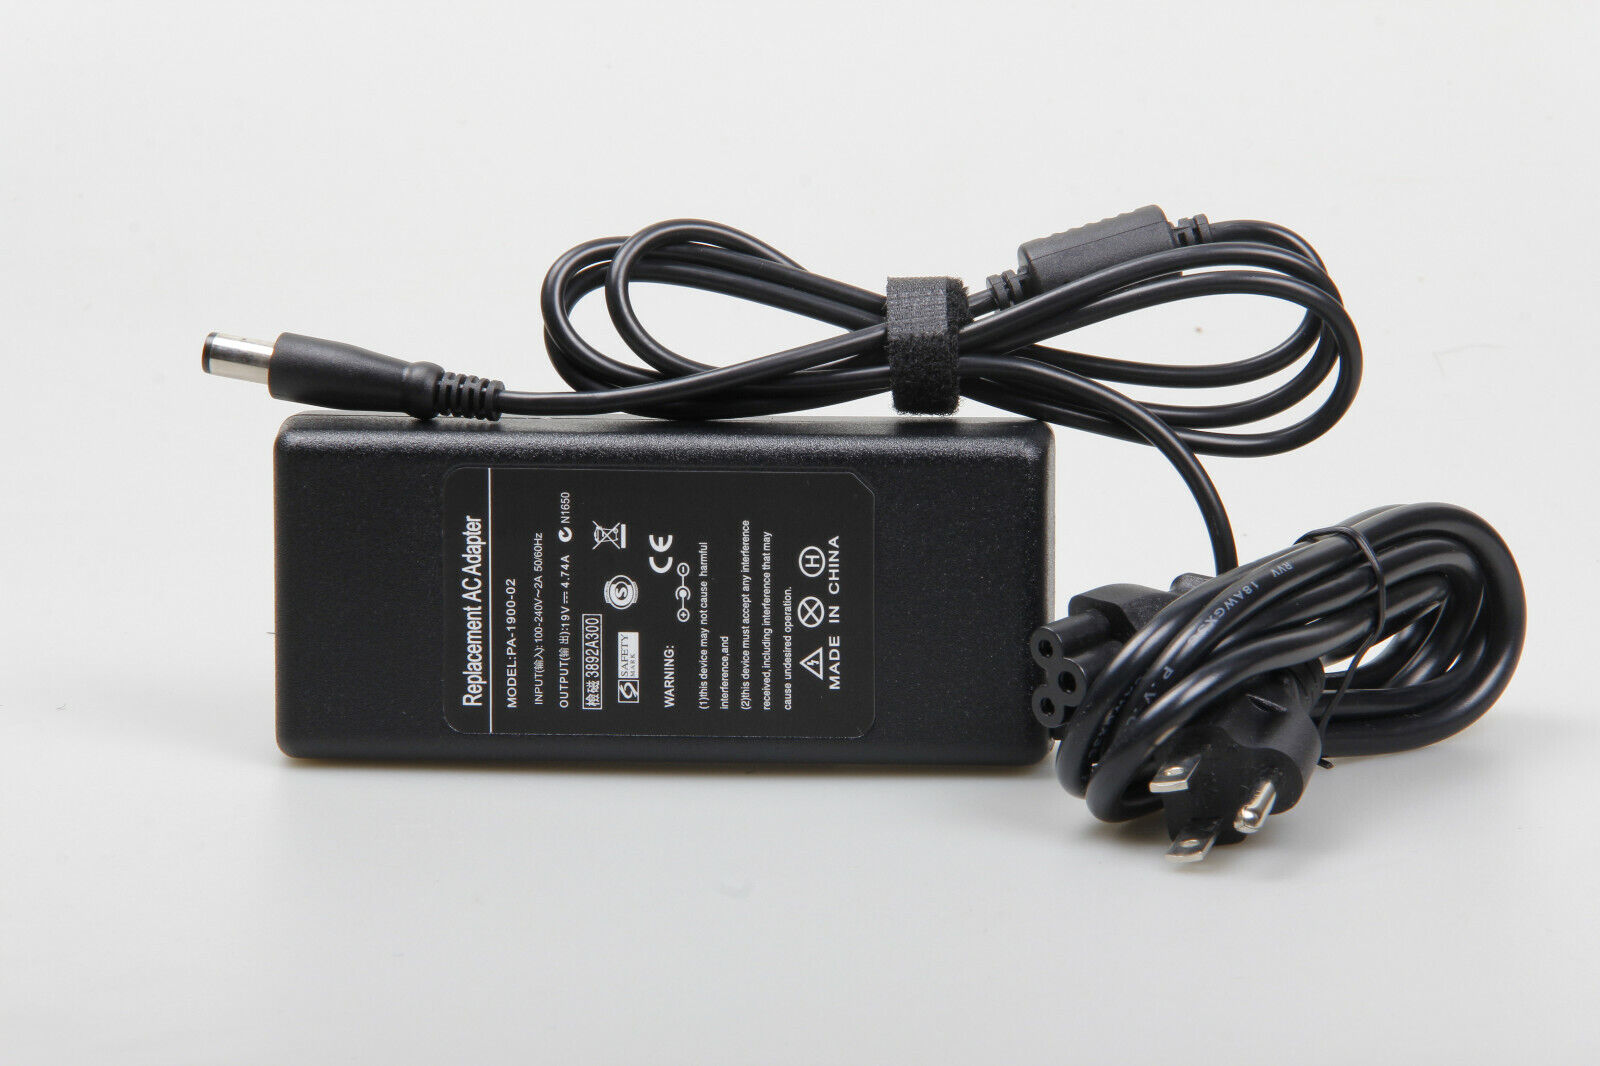 AC Adapter For HP Pavilion 23-h051 23-h052 23-h056 23-h139 All-in-One Desktop